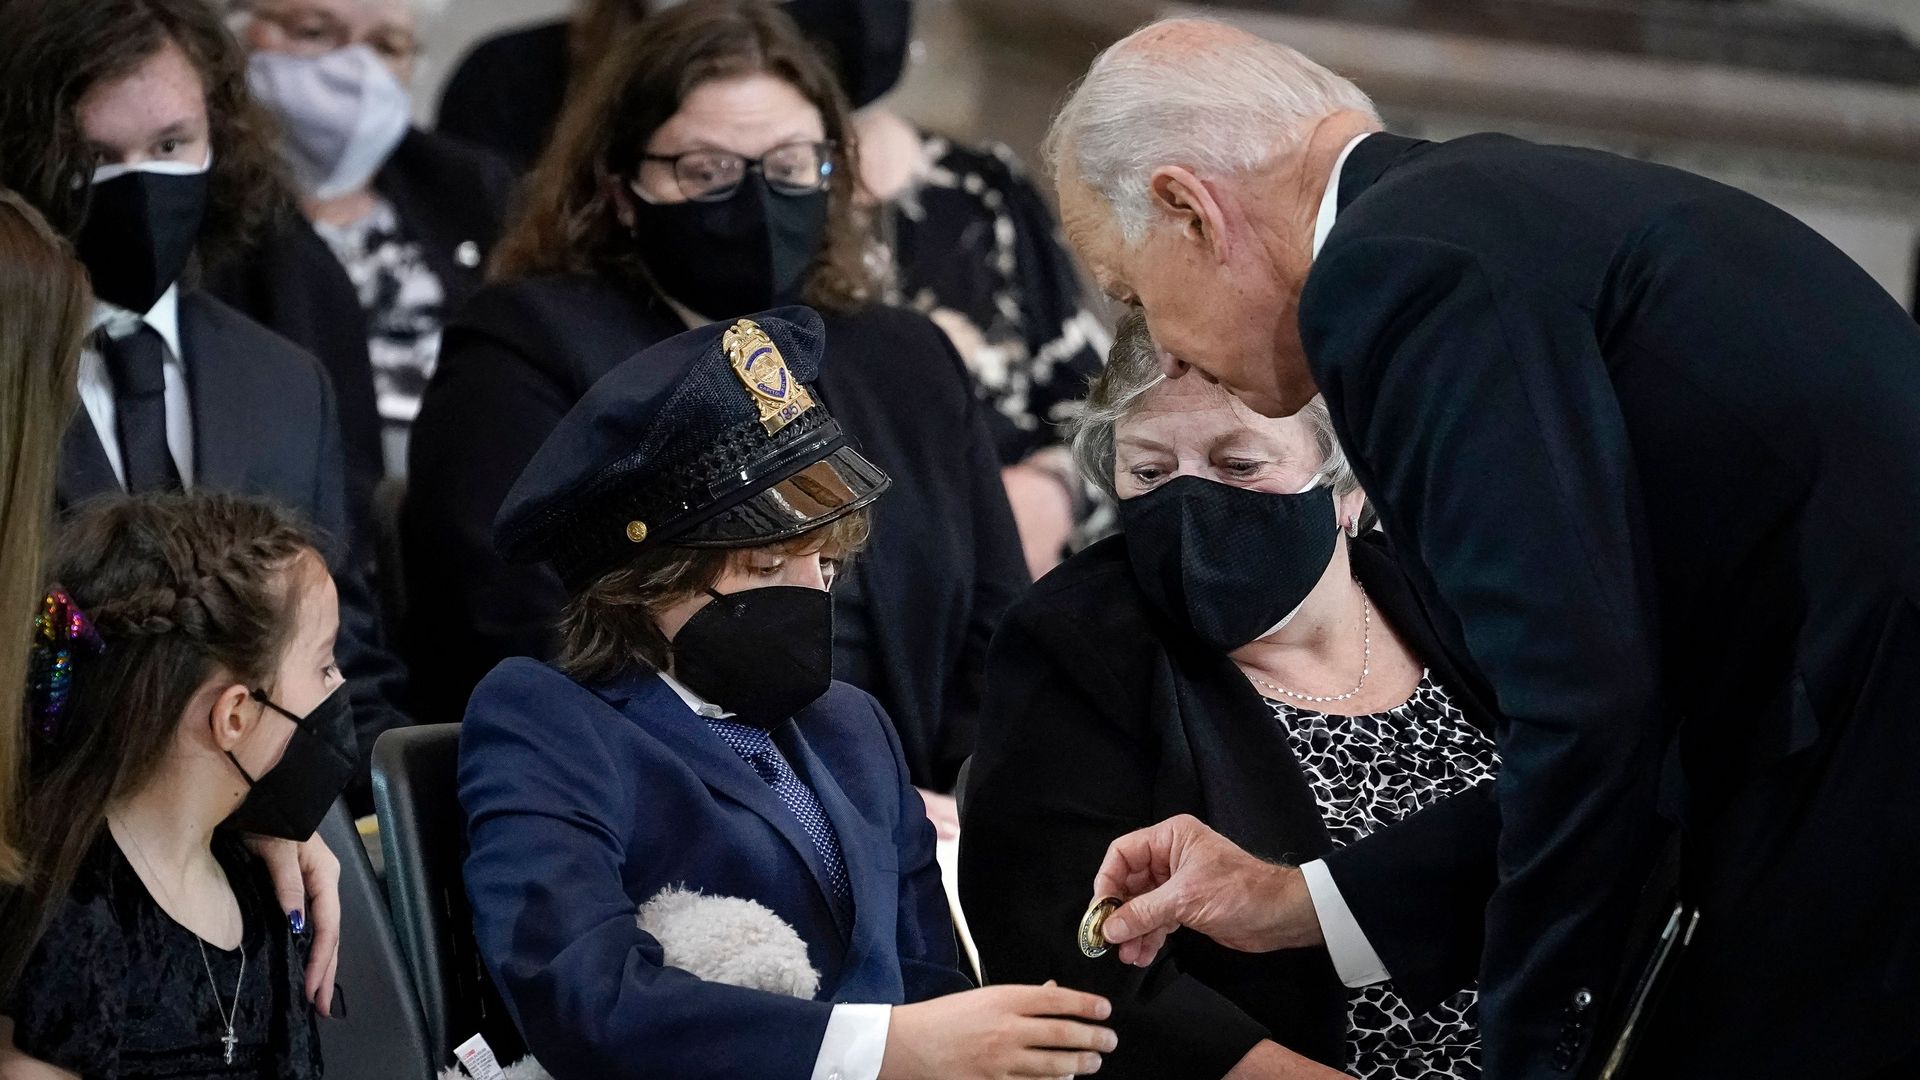 President Biden is seen presenting one of his Challenge Coins to the son of slain Capitol Police Officer Billy Evans.